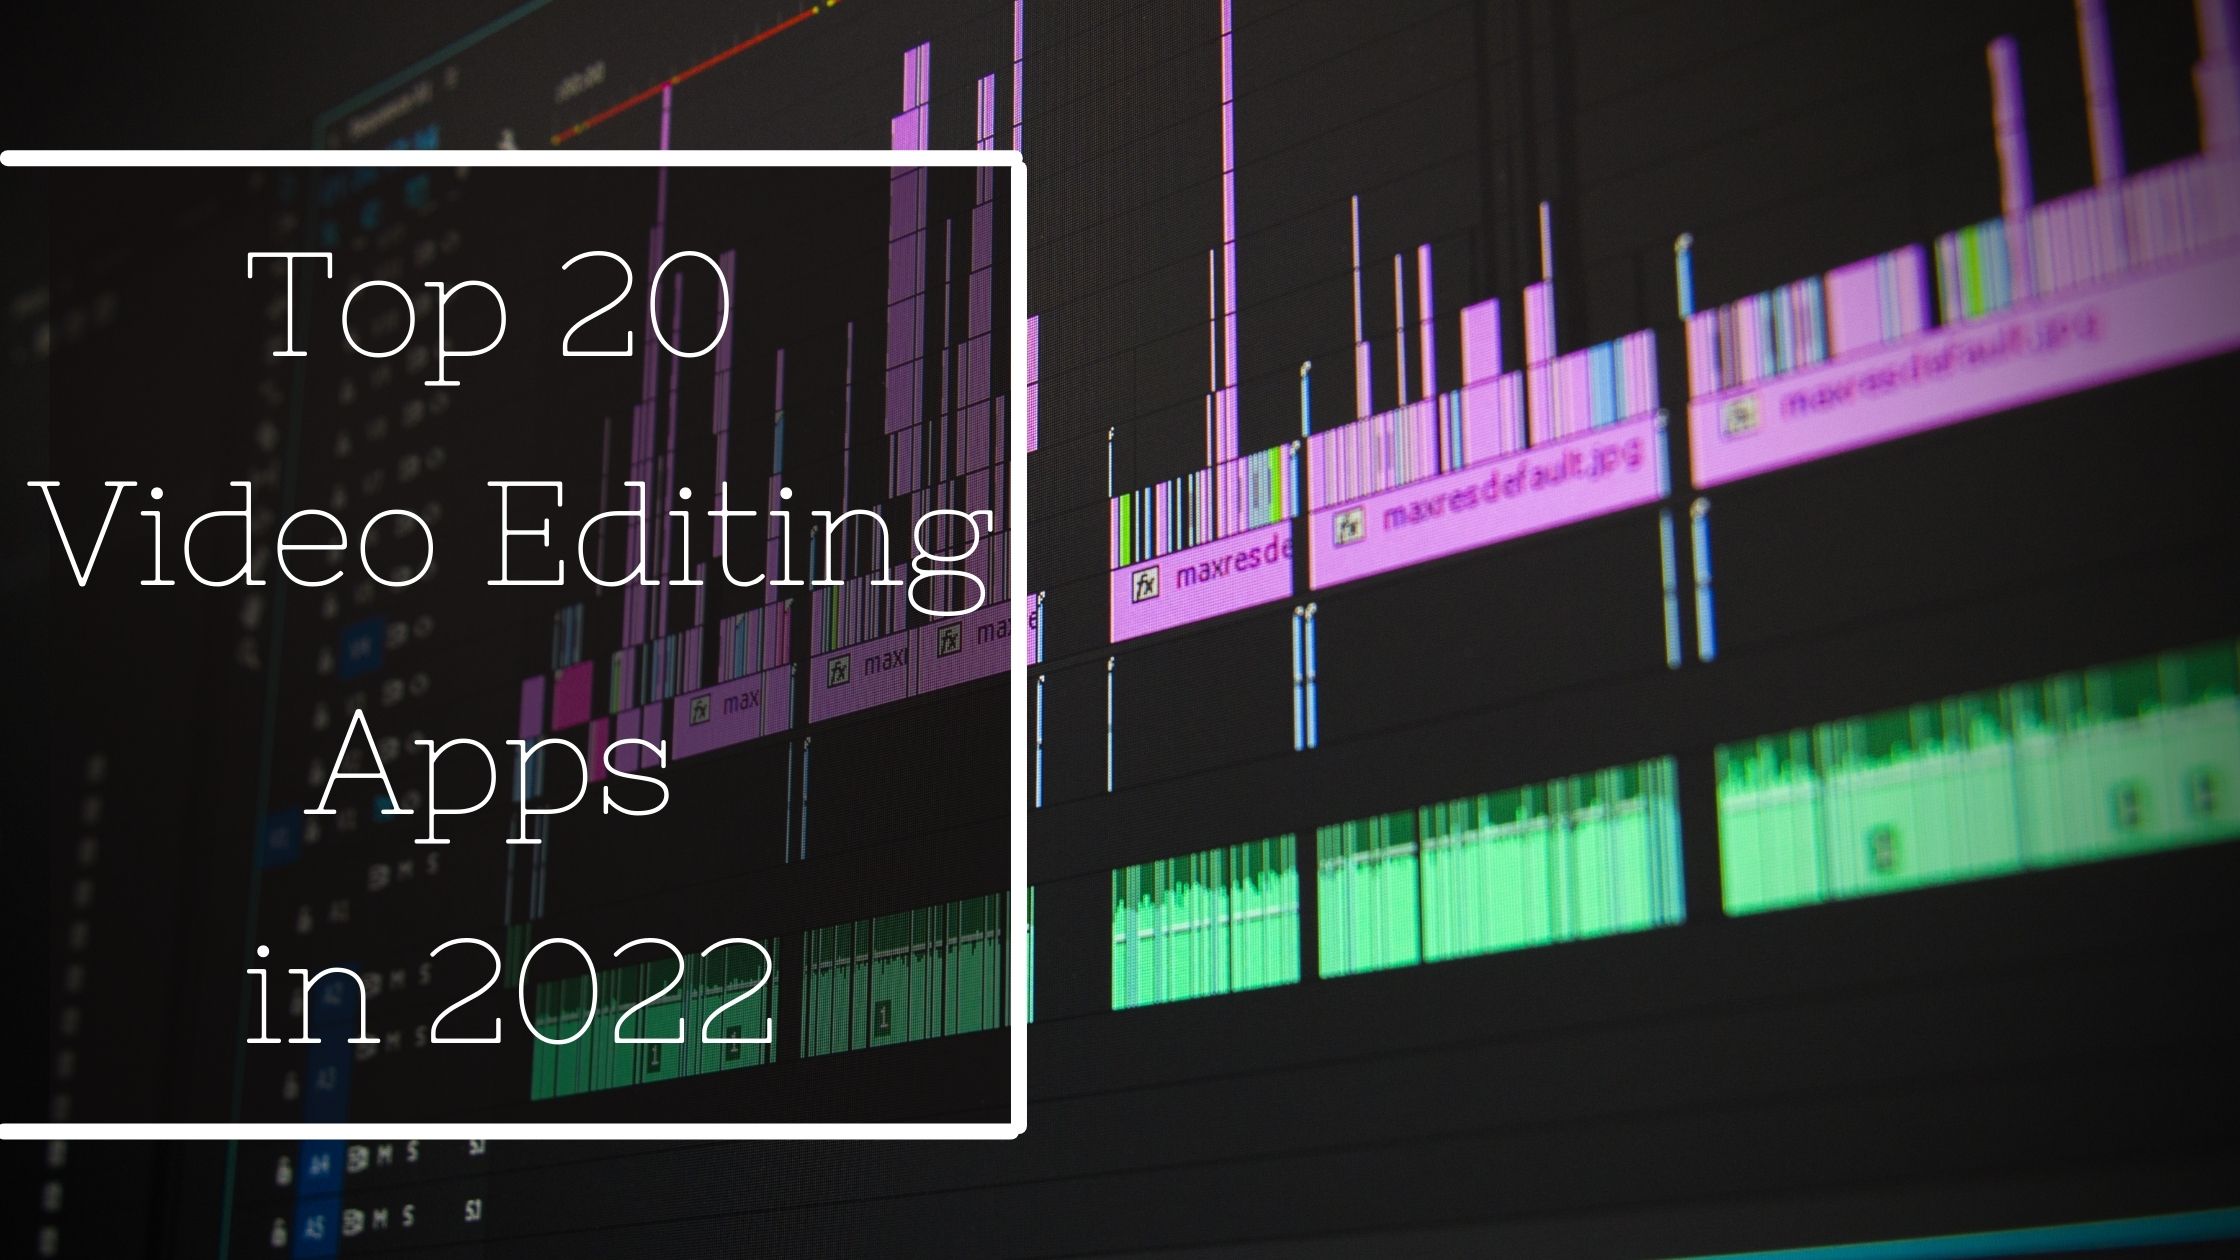 Top 20 Video Editing Apps in 2022 [Free and Paid]